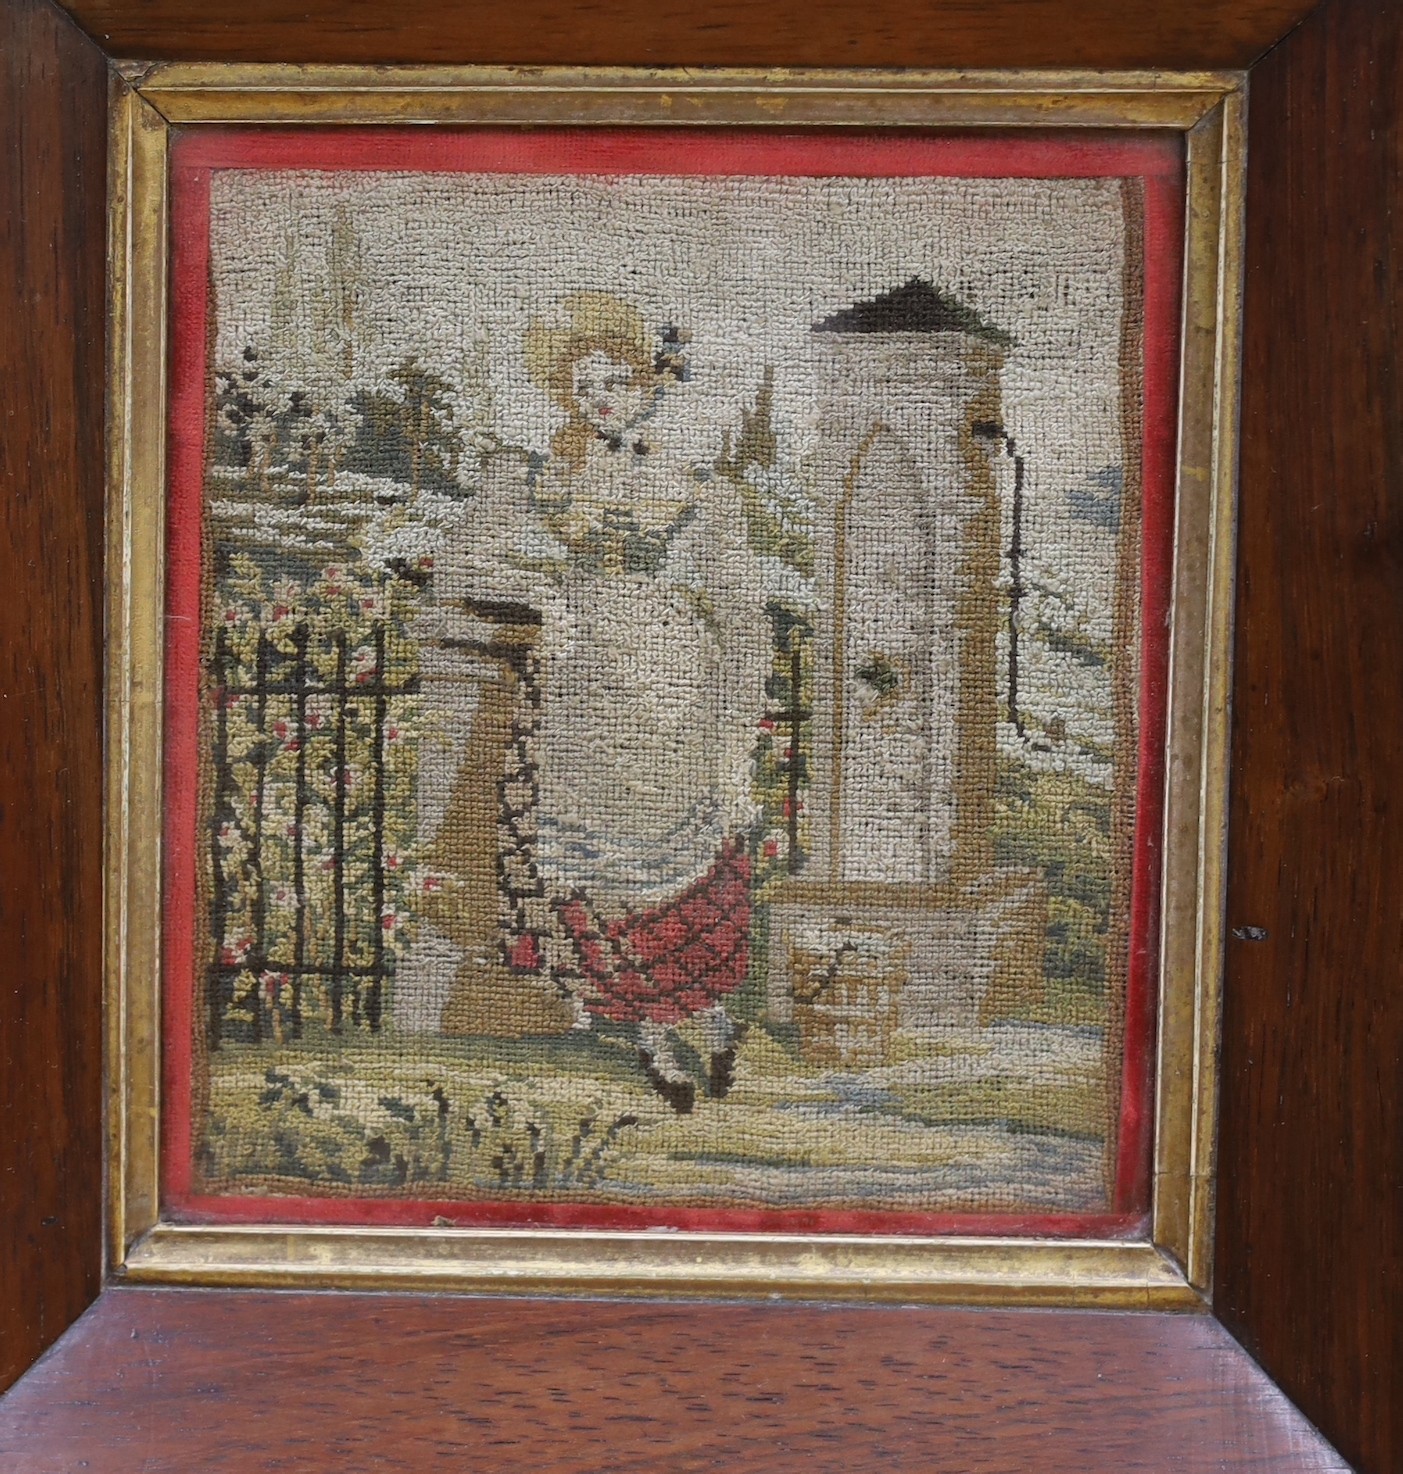 A late 19th century sample by Eliza Wood, aged 10, dated 1882, 43 x 40cm, together with a smaller glazed frame needlework panel of a lady leaning